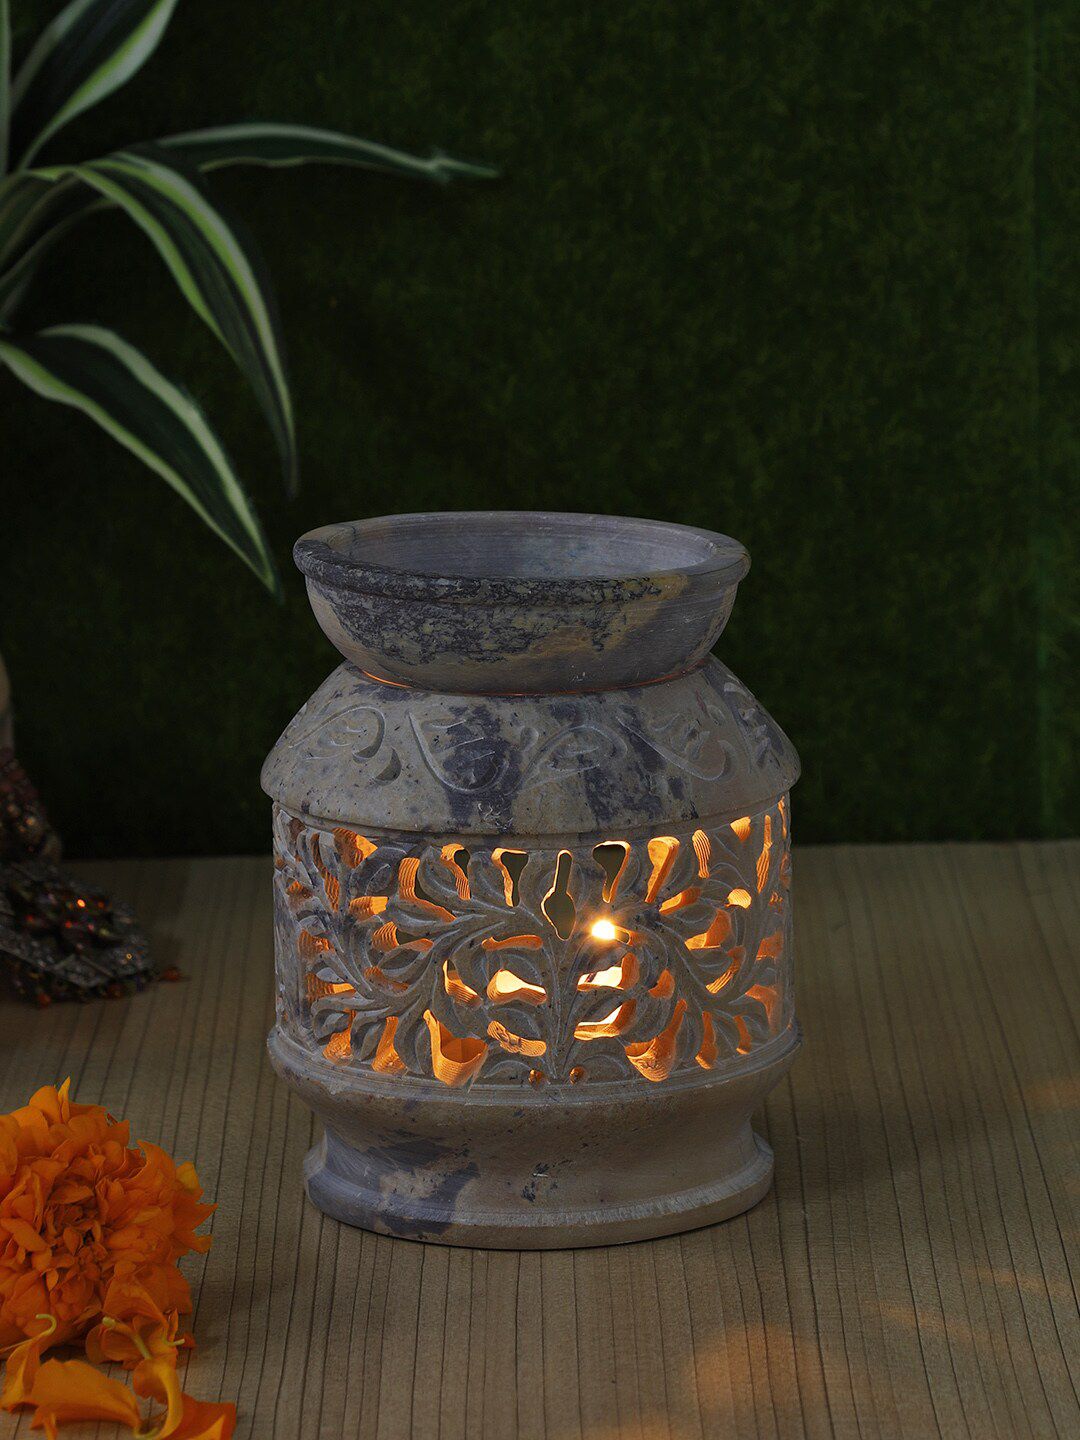 Aapno Rajasthan Stone Oil Diffuser Price in India